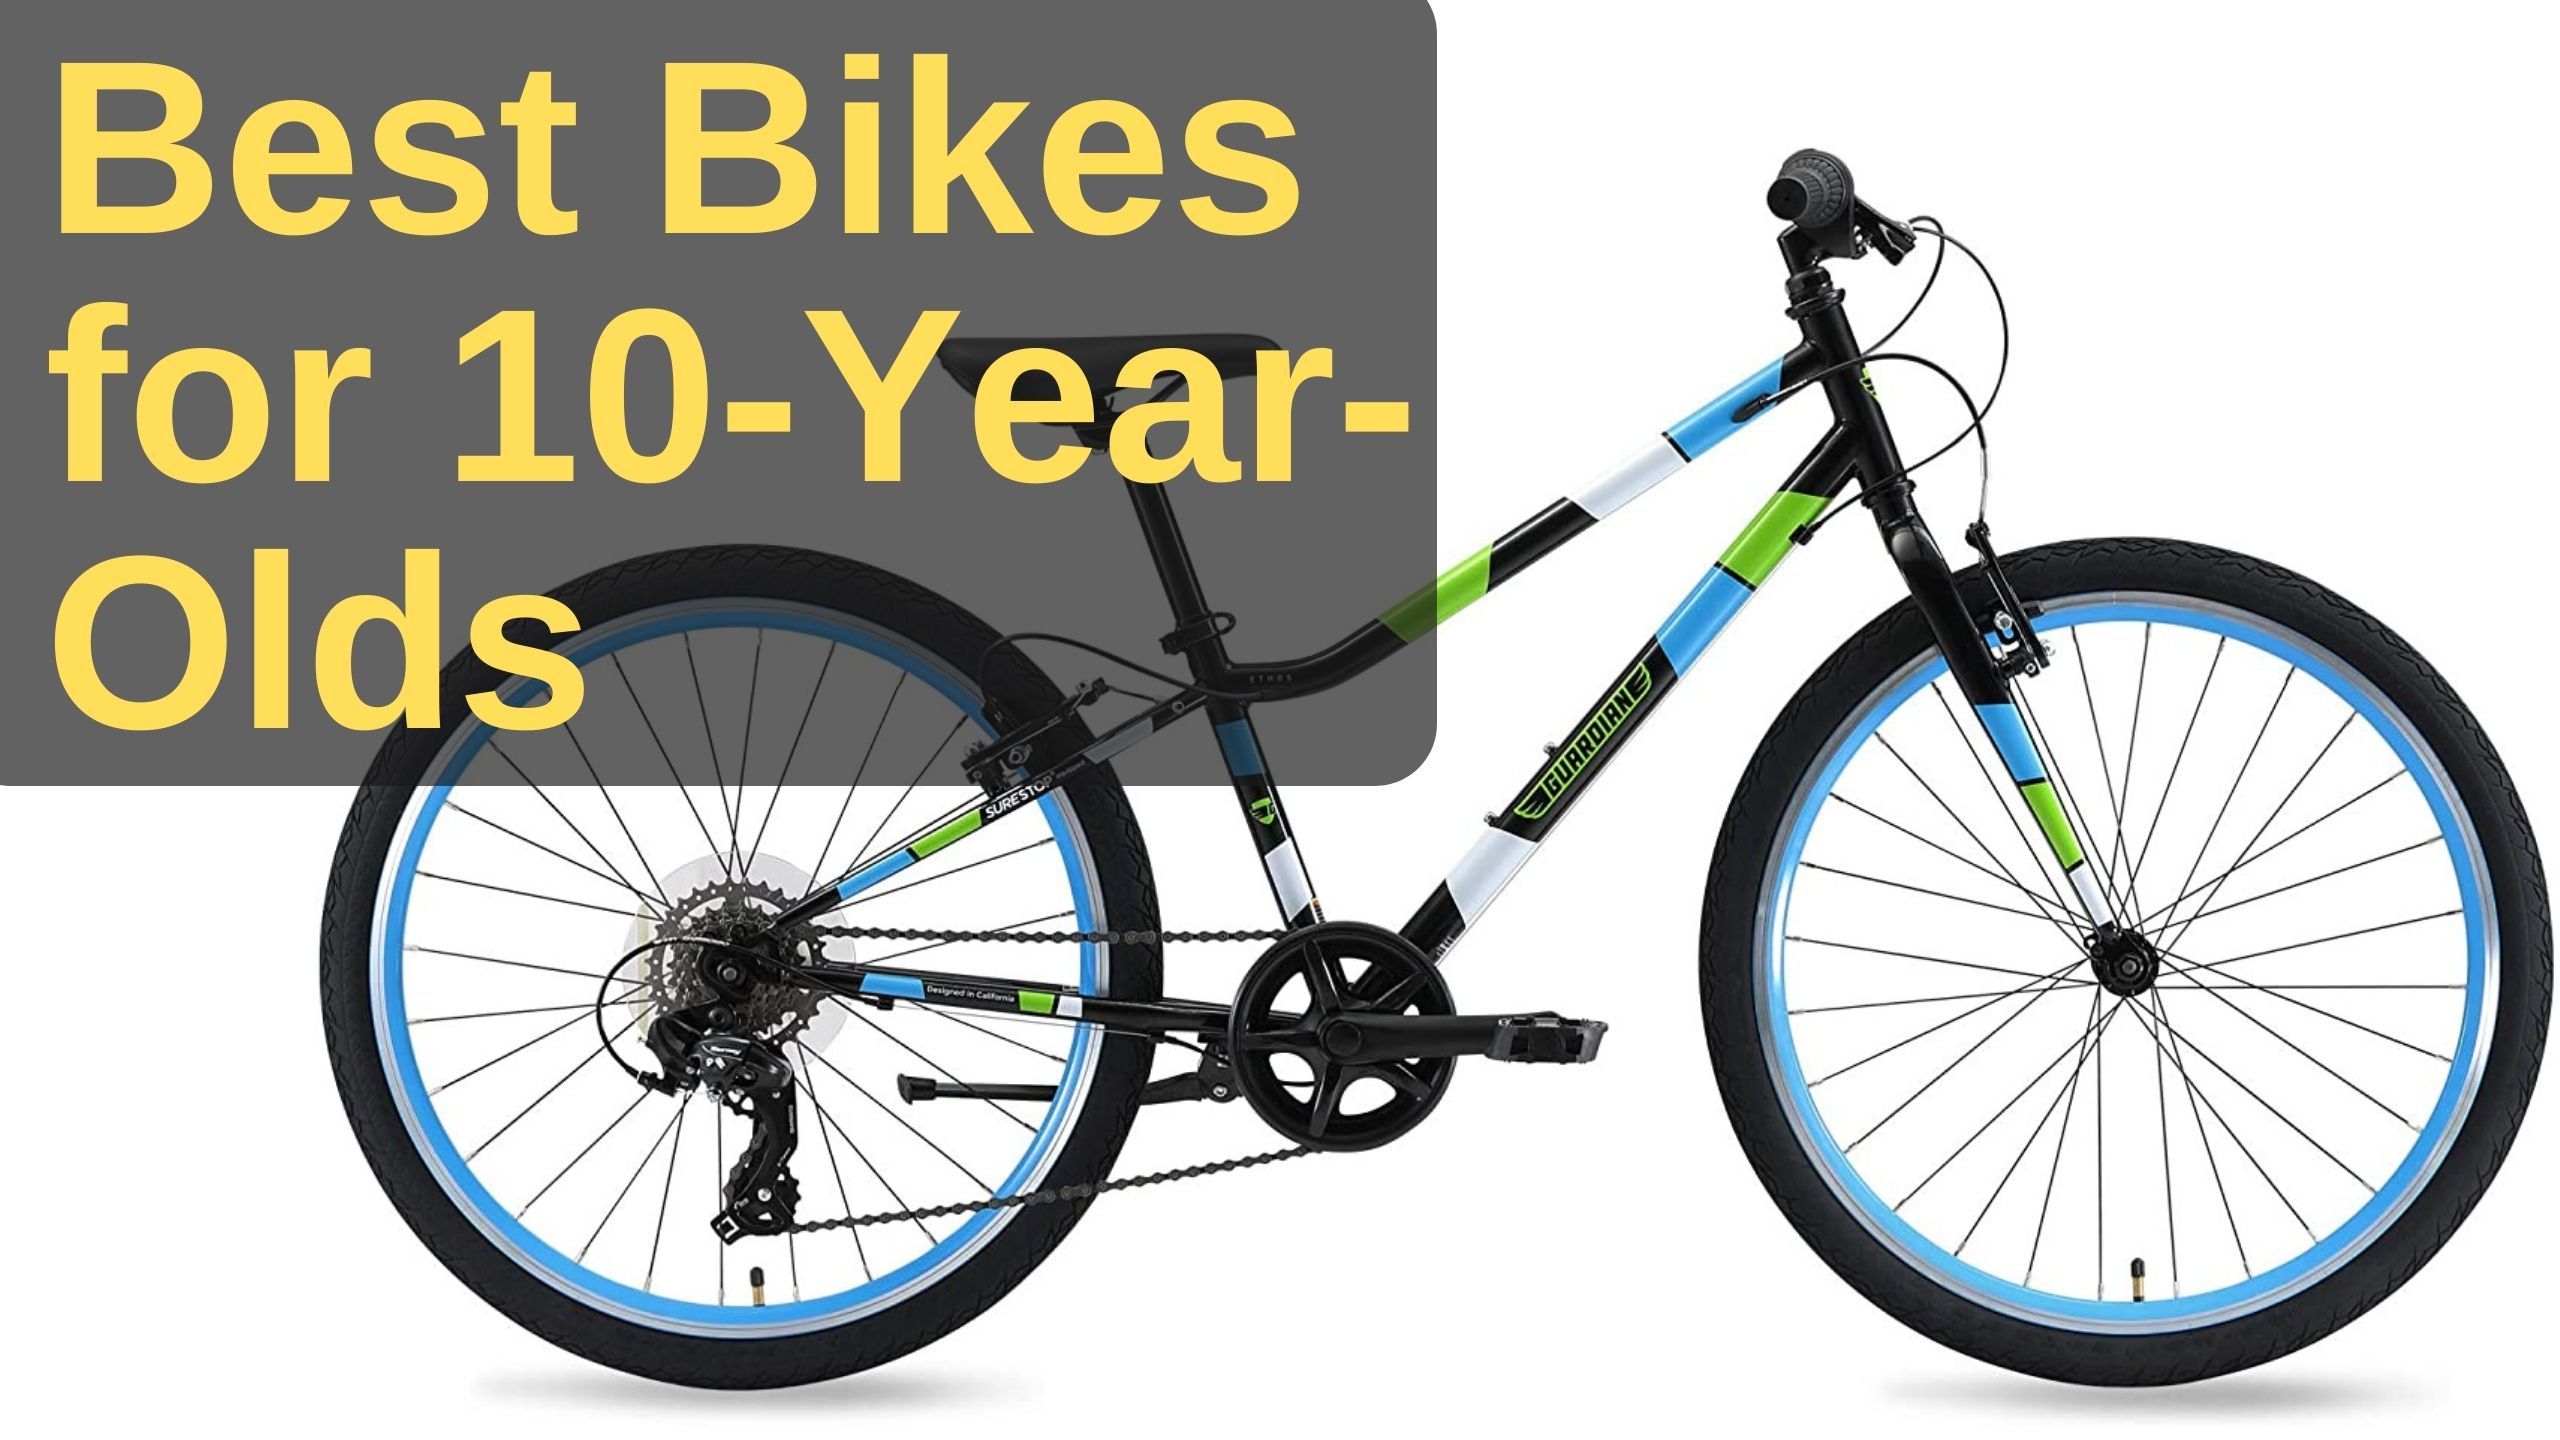 Best Bikes for 10 Year Olds